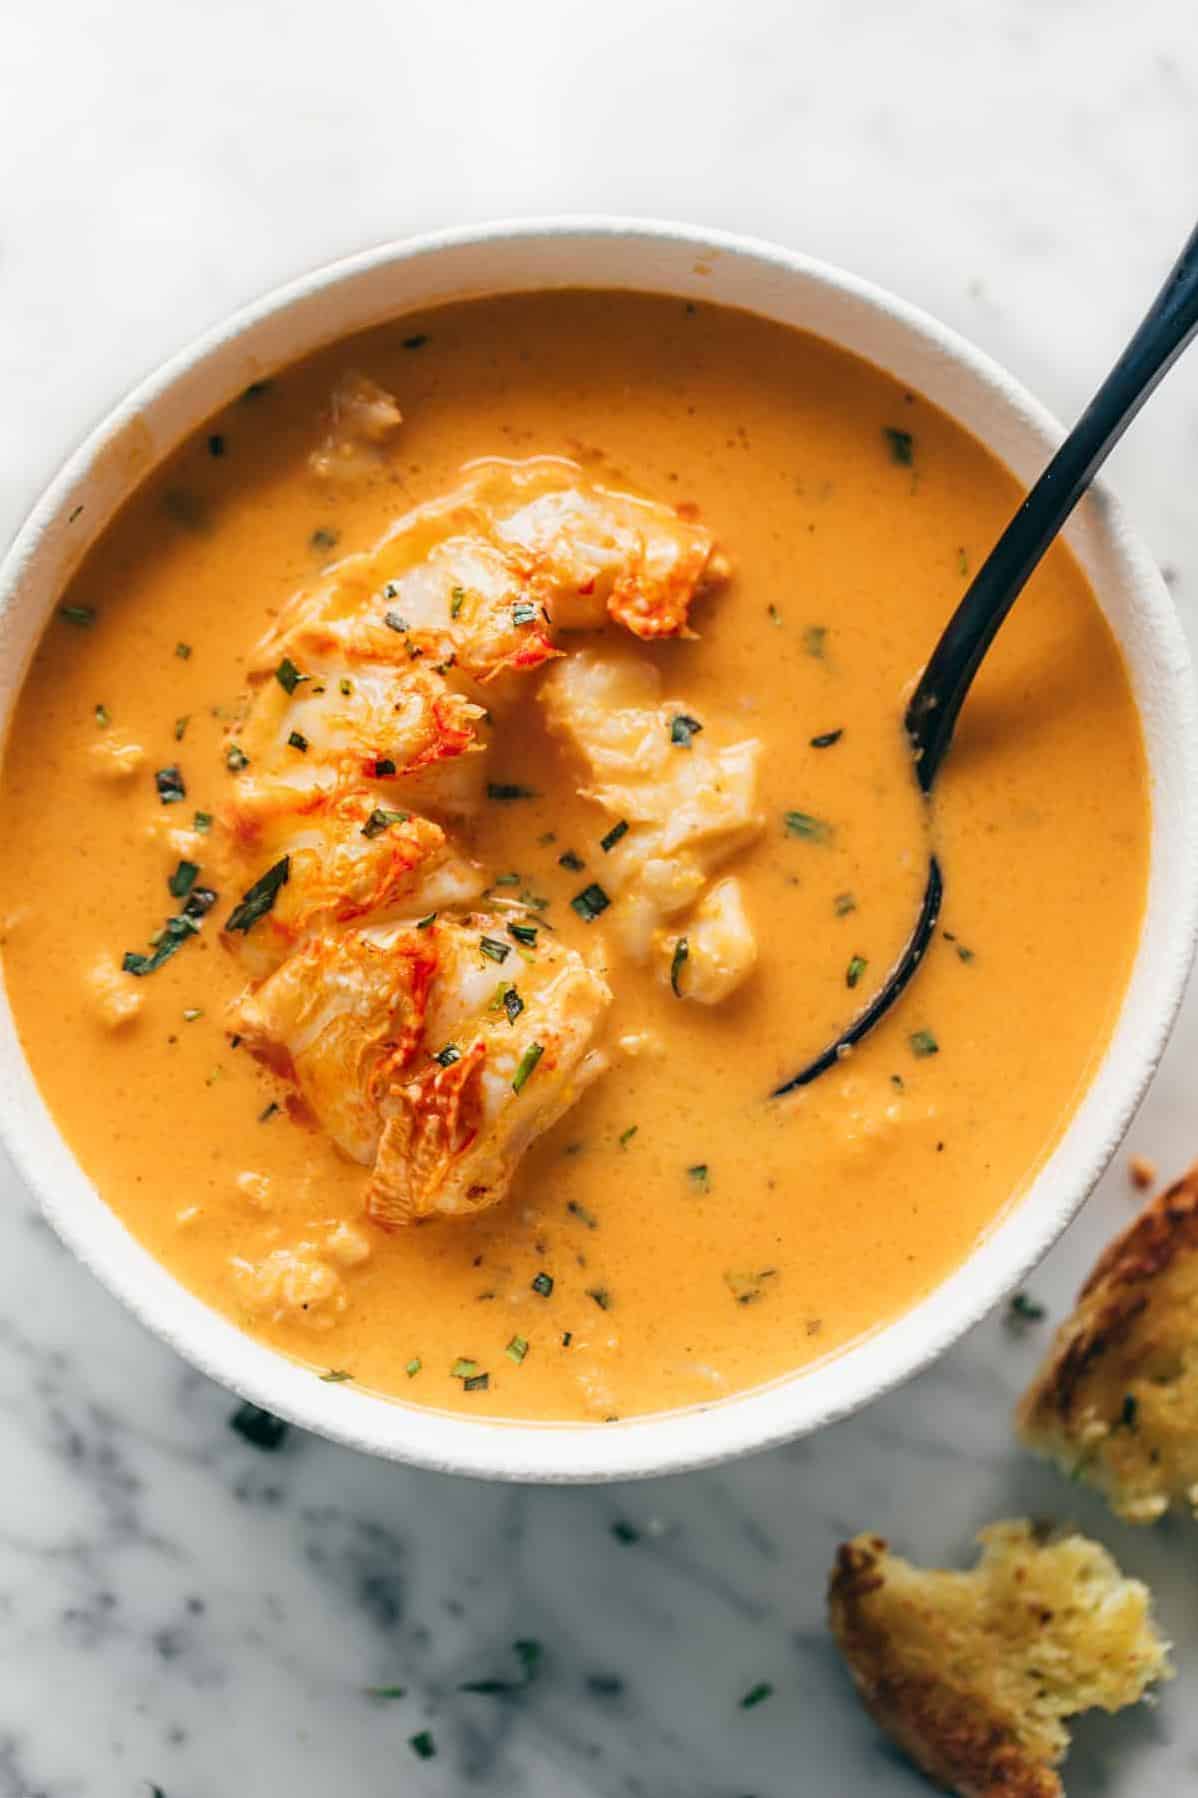  Creamy, flavorful, and packed with seafood